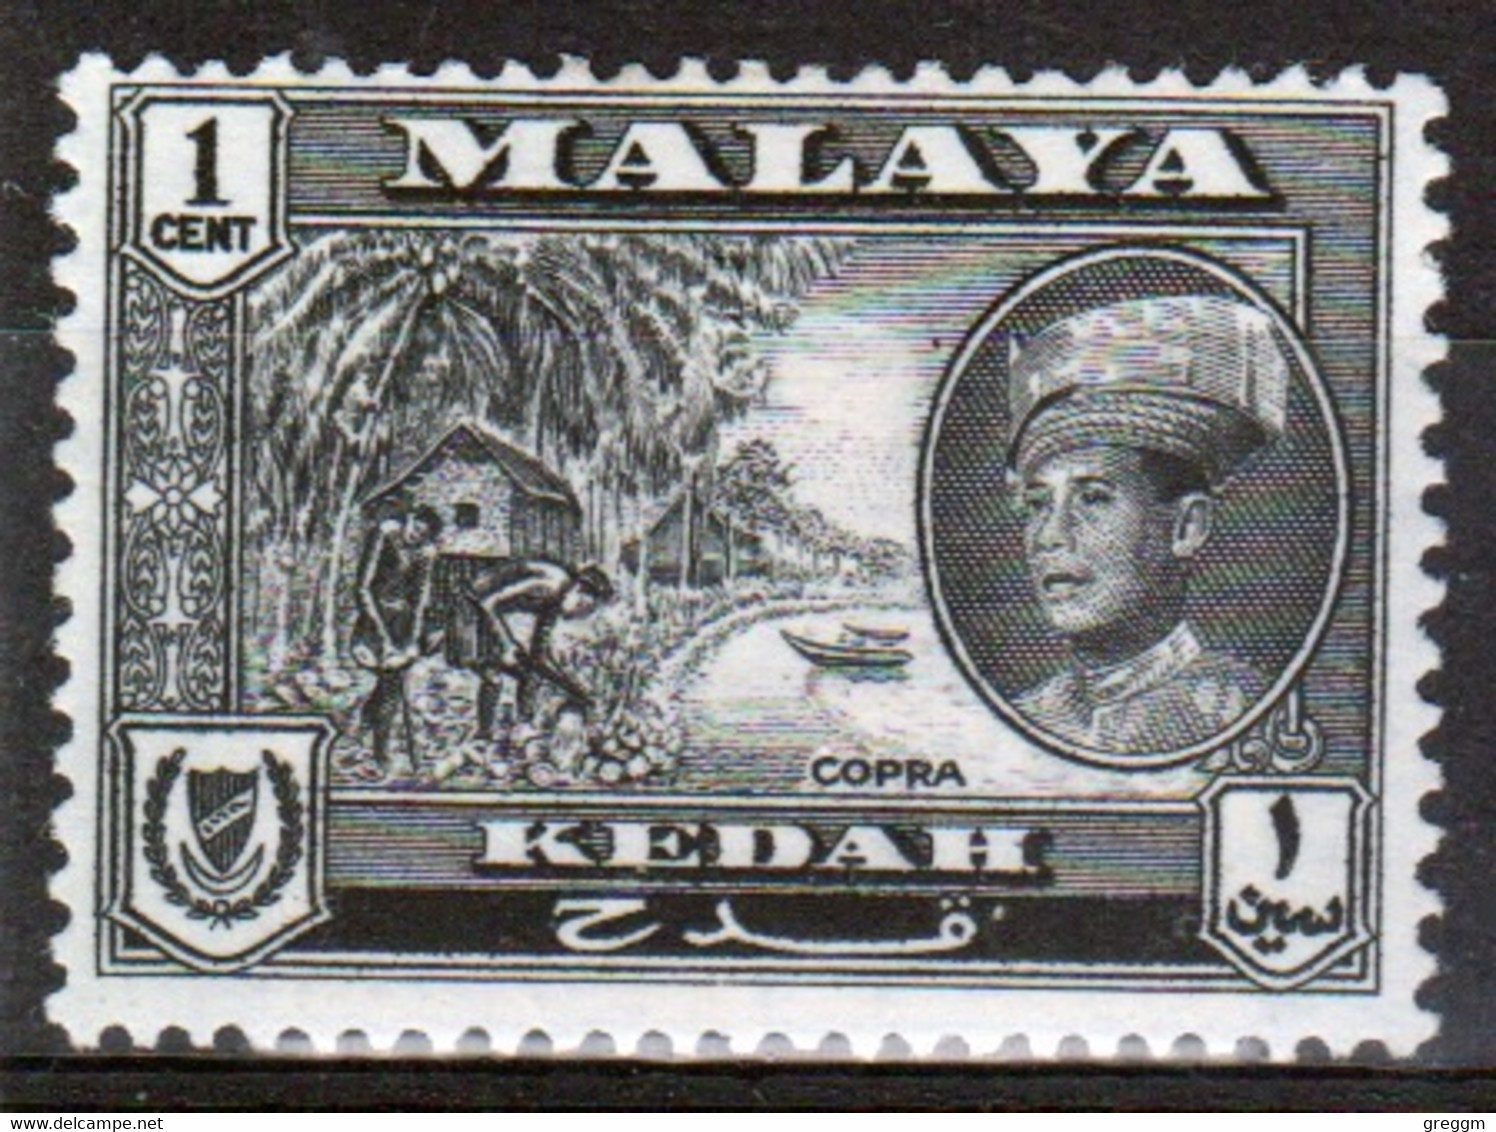 Malaysia Kedah 1959 Single 1c Definitive Stamp Which Is I Believe Cat No 104 In Mounted Mint - Kedah